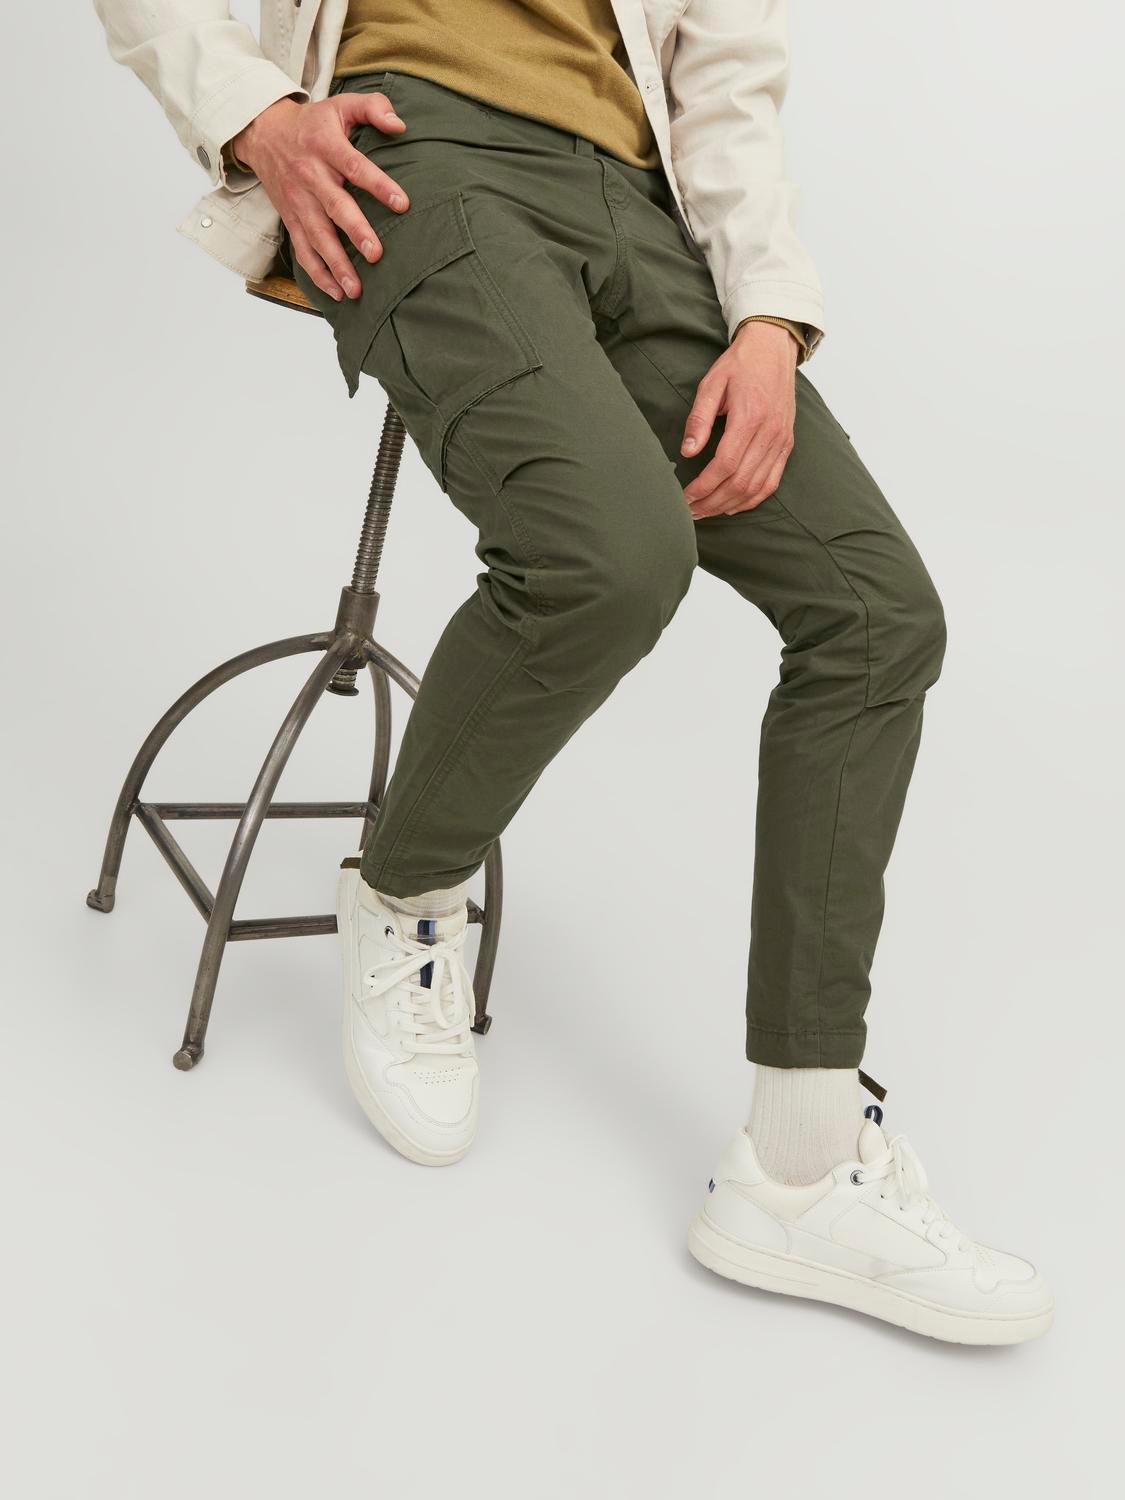 Men's Carrot Pants − Shop 91 Items, 66 Brands & up to −84